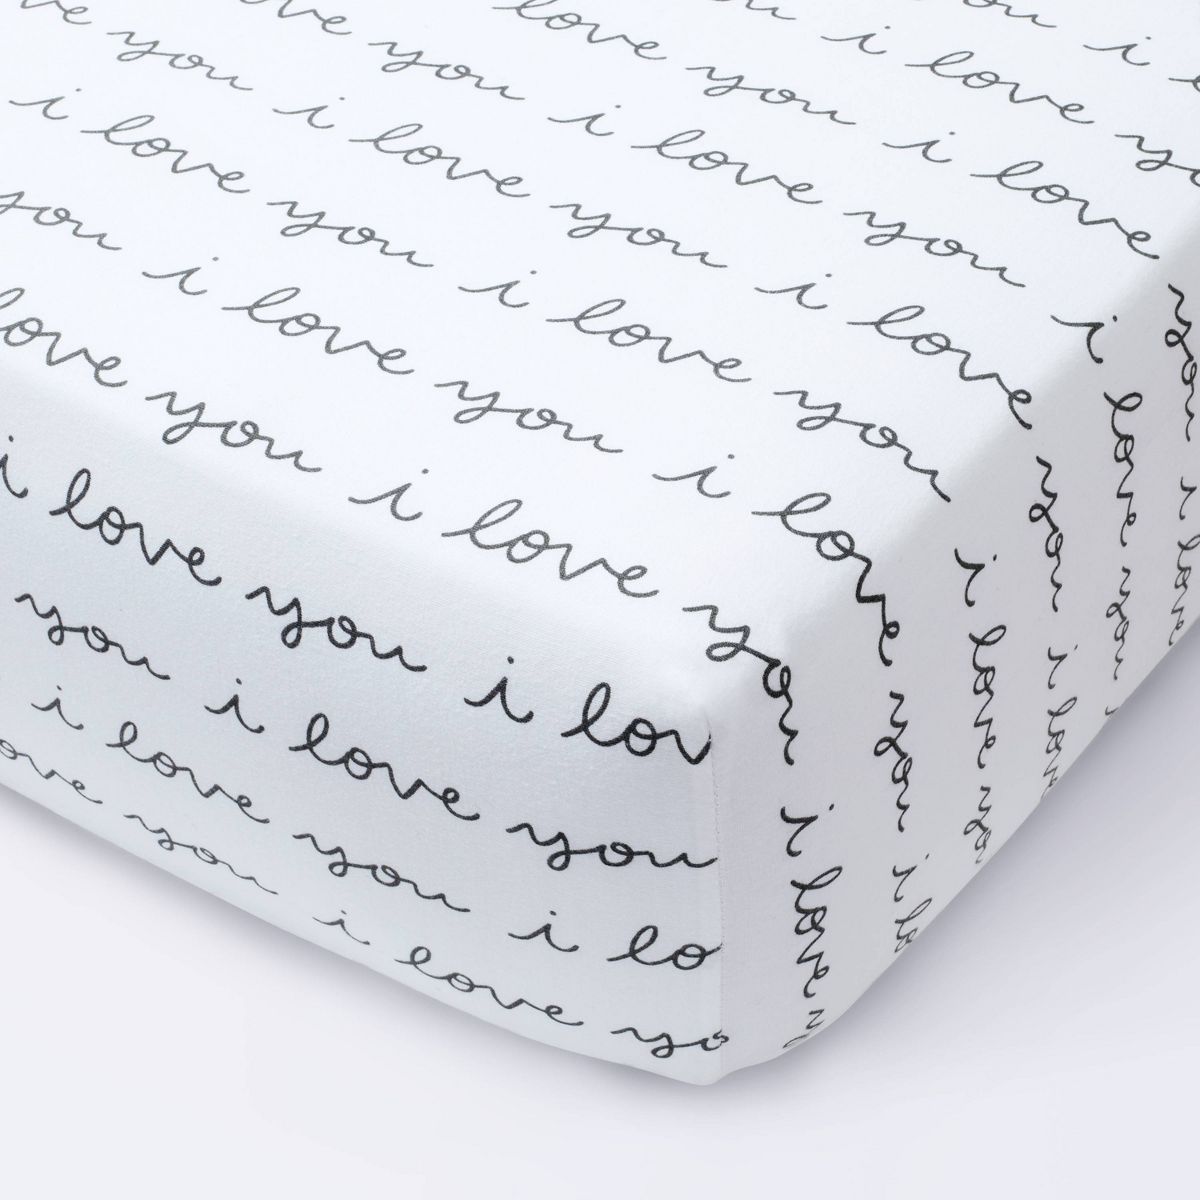 Fitted Crib Sheet I Love You - Cloud Island™ White/Gray | Target